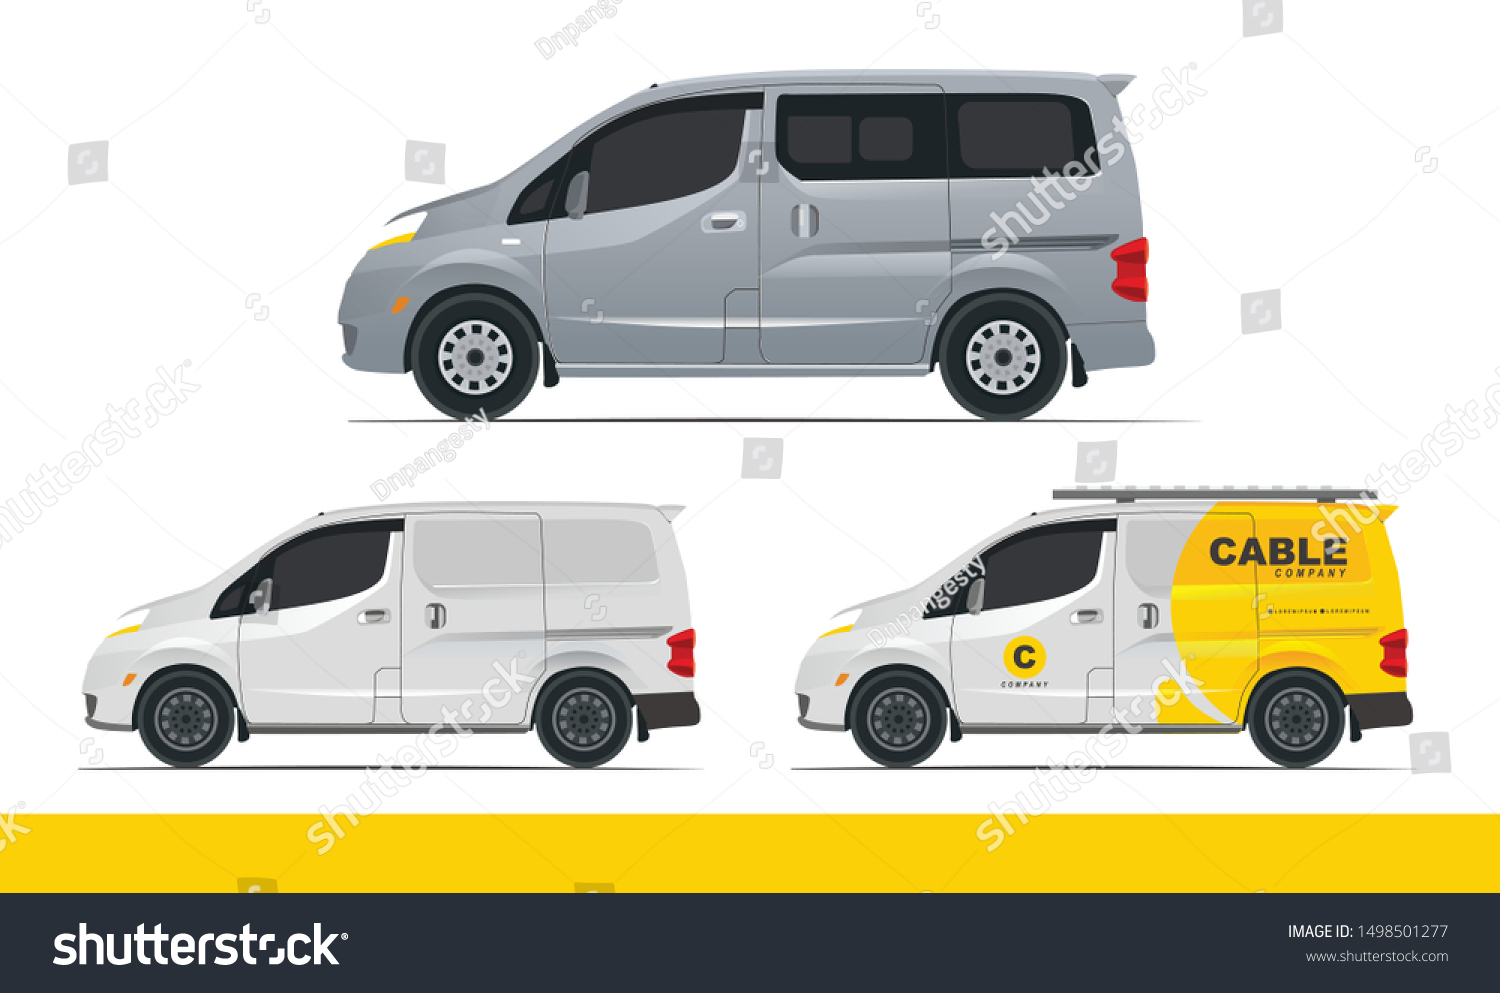 SVG of Set Illustration of Family Van Car Mpv with 4 doors, sliding door, and service branding for company svg